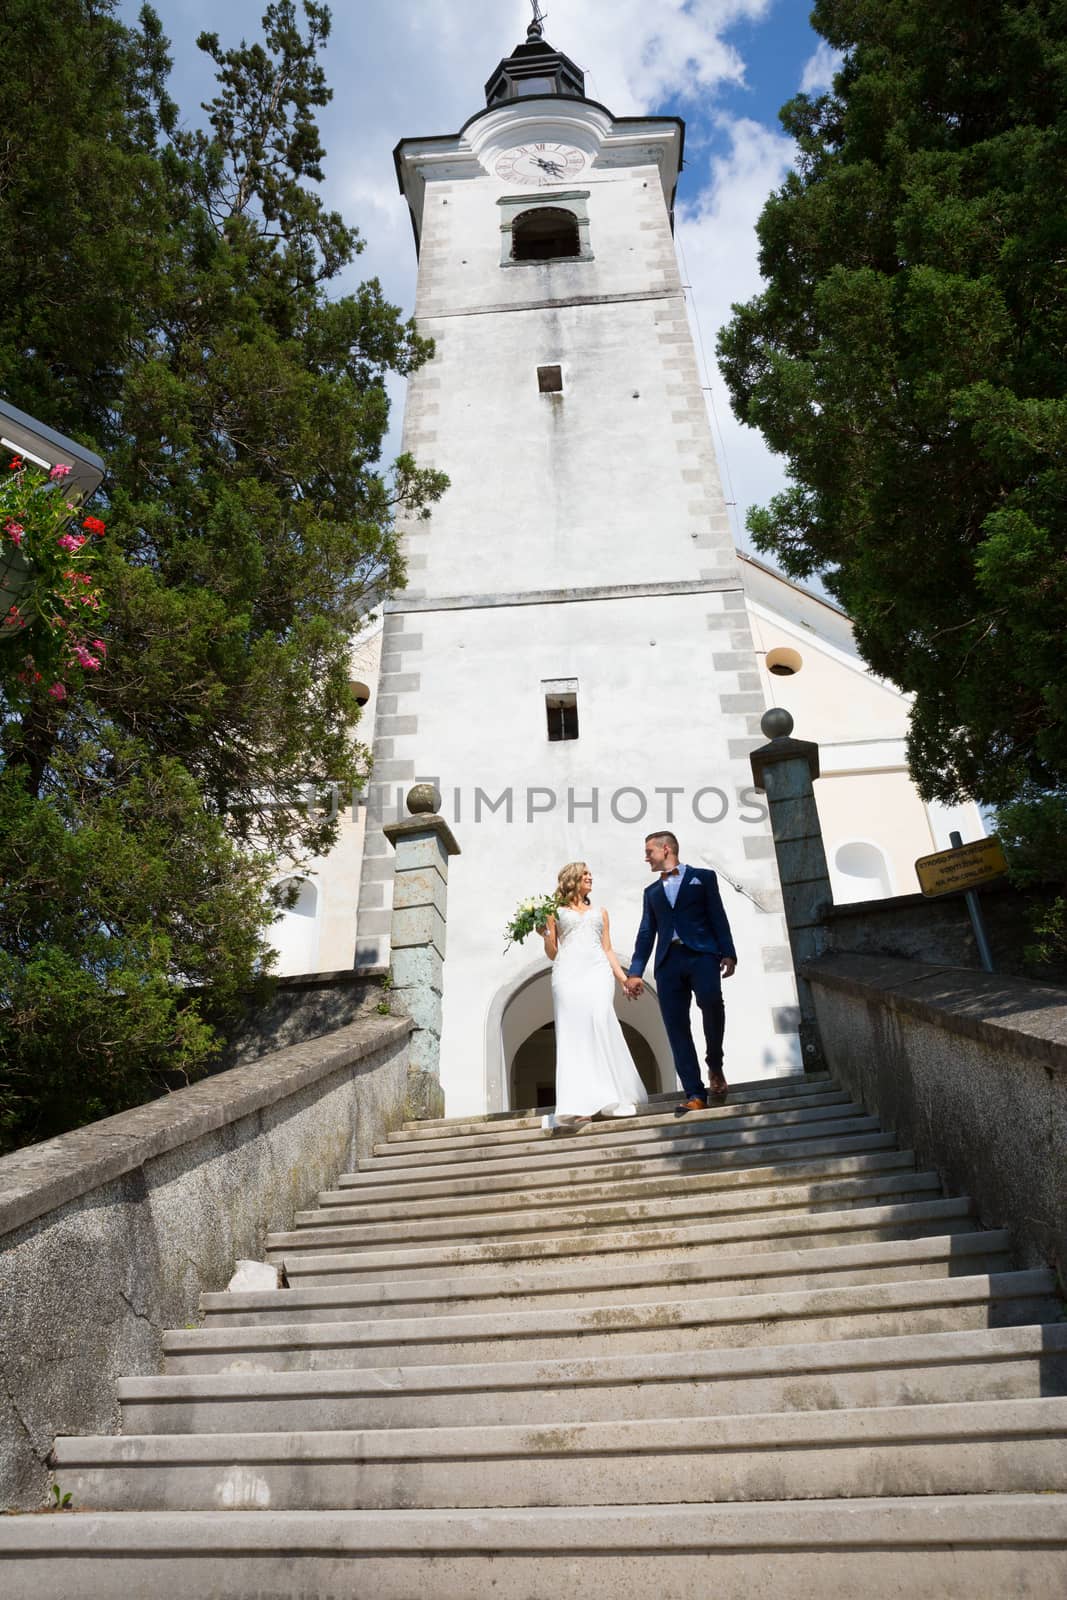 The Kiss. Bride and groom holding hands walking down the staircase in front of a small local church. Stylish wedding couple kissing.